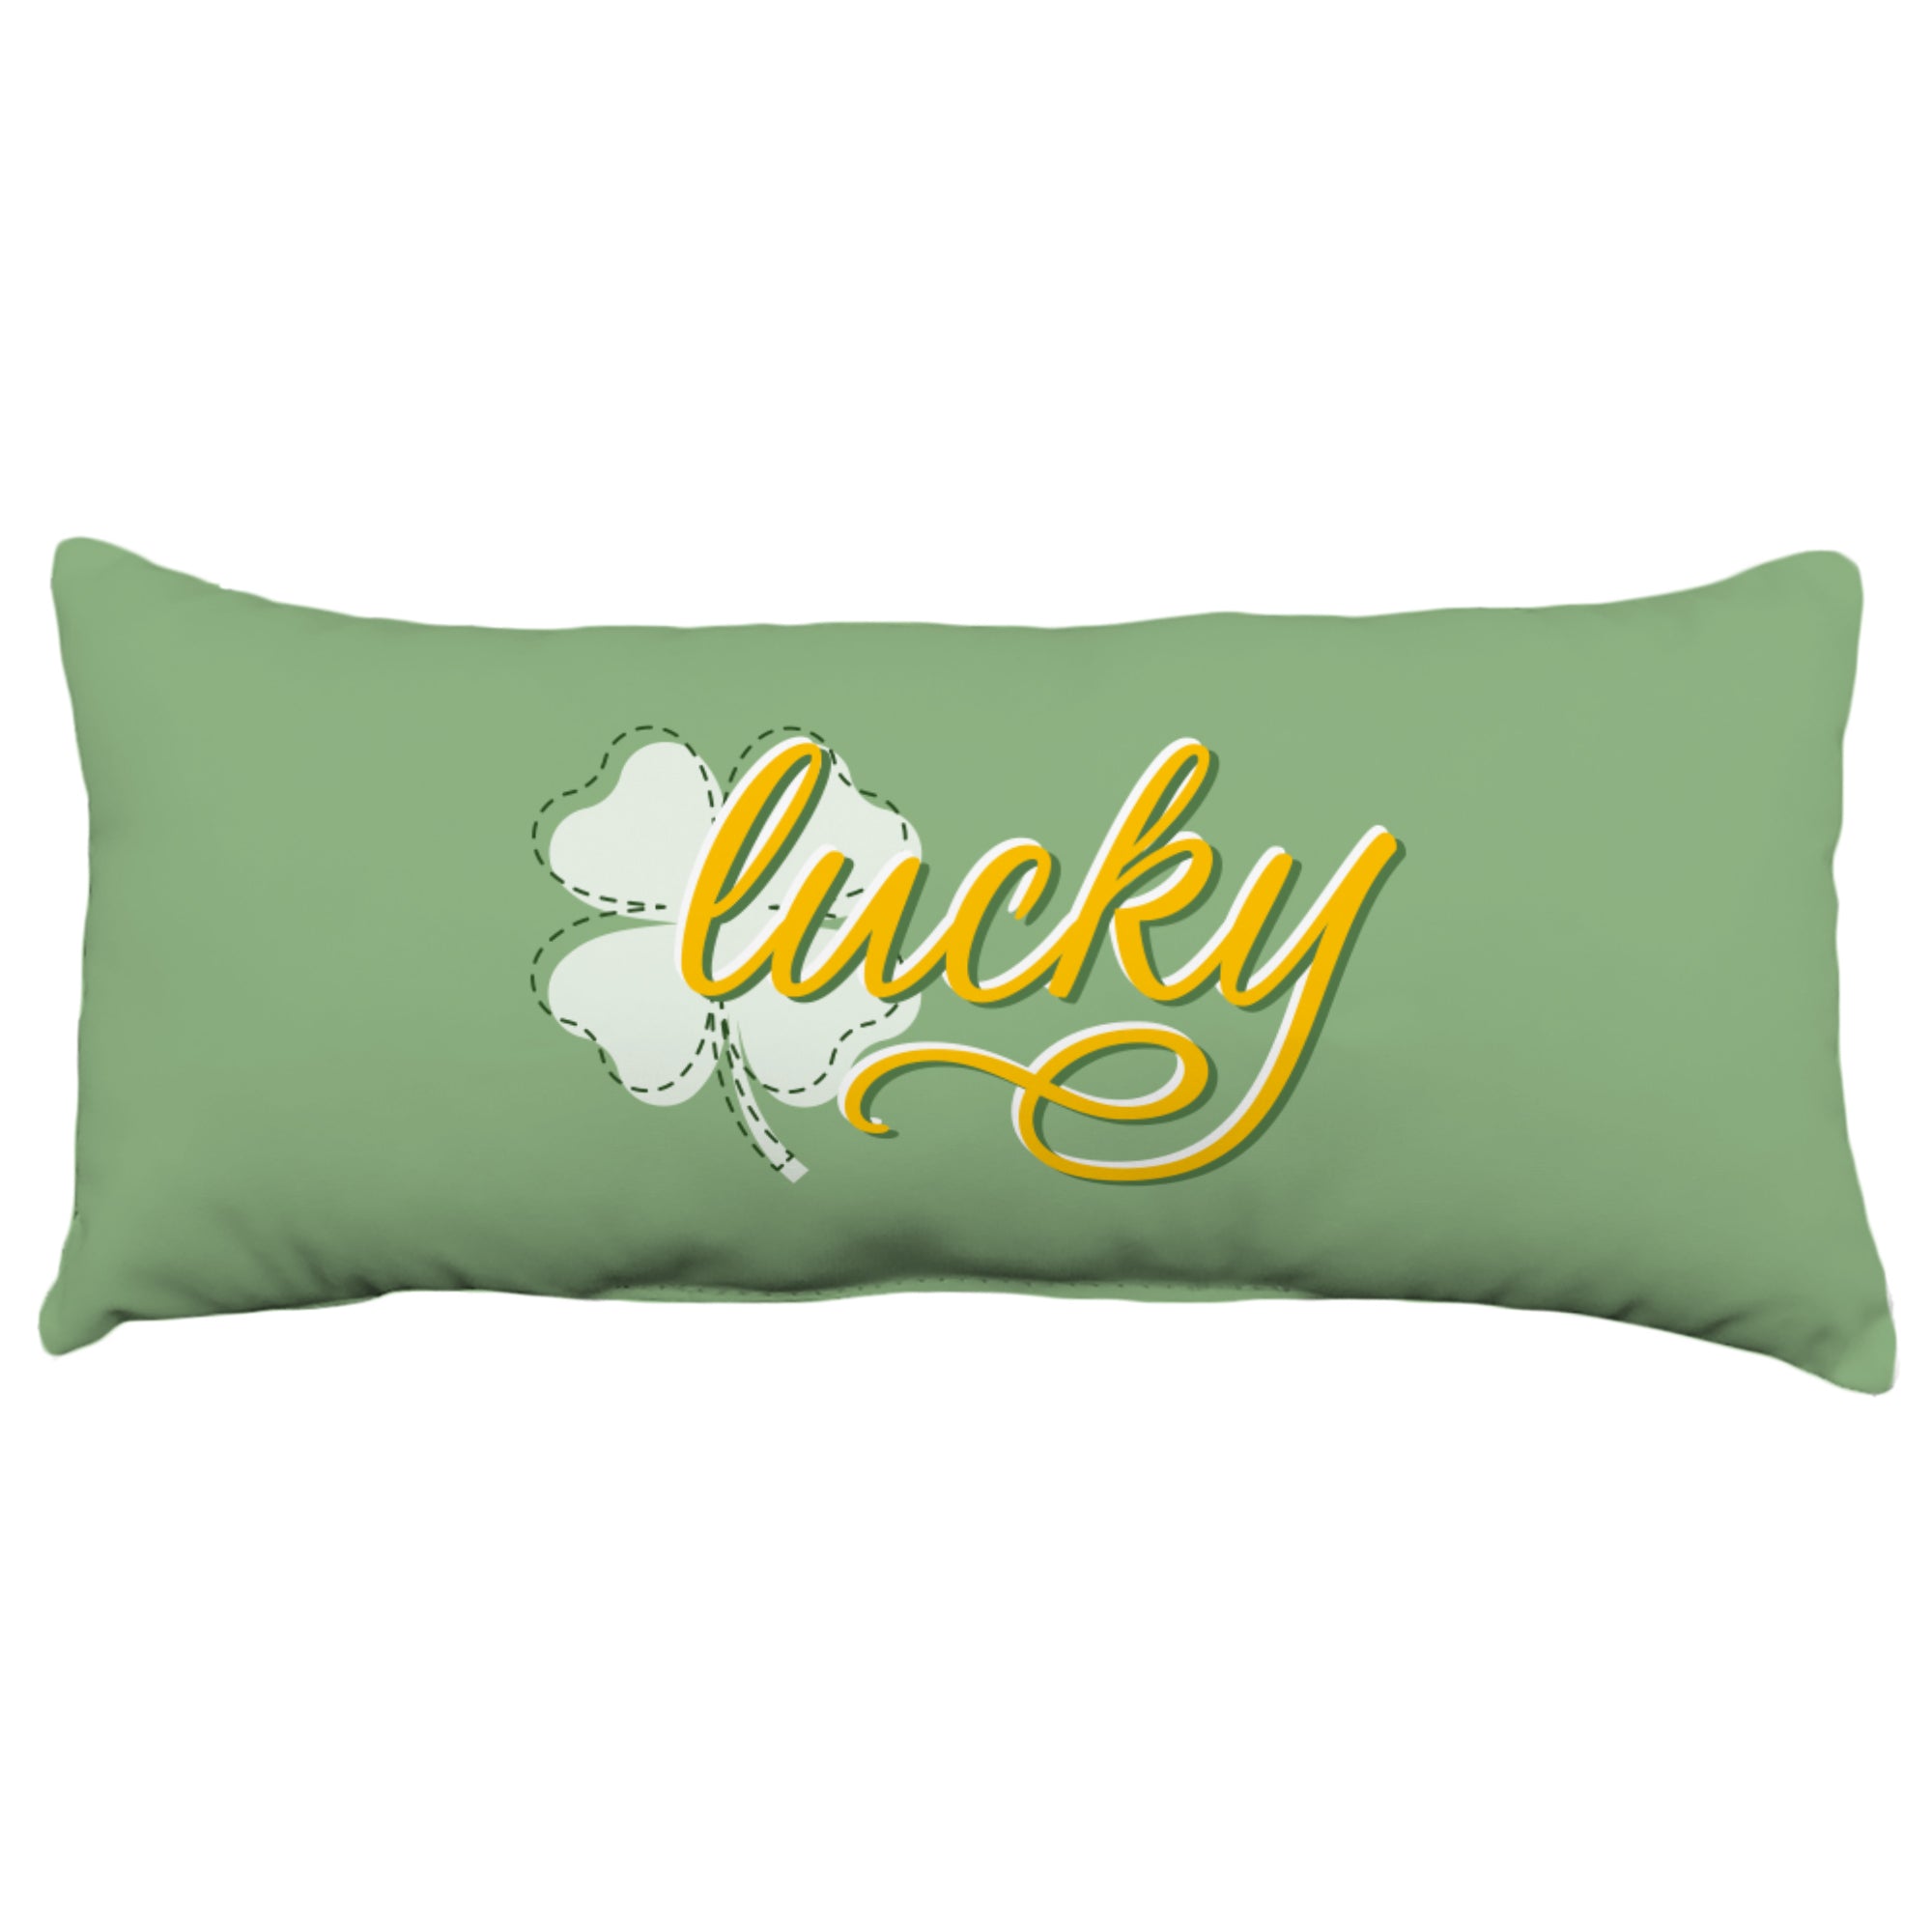 Lucky Decorative Pillow, 2 Sizes, Made in the USA